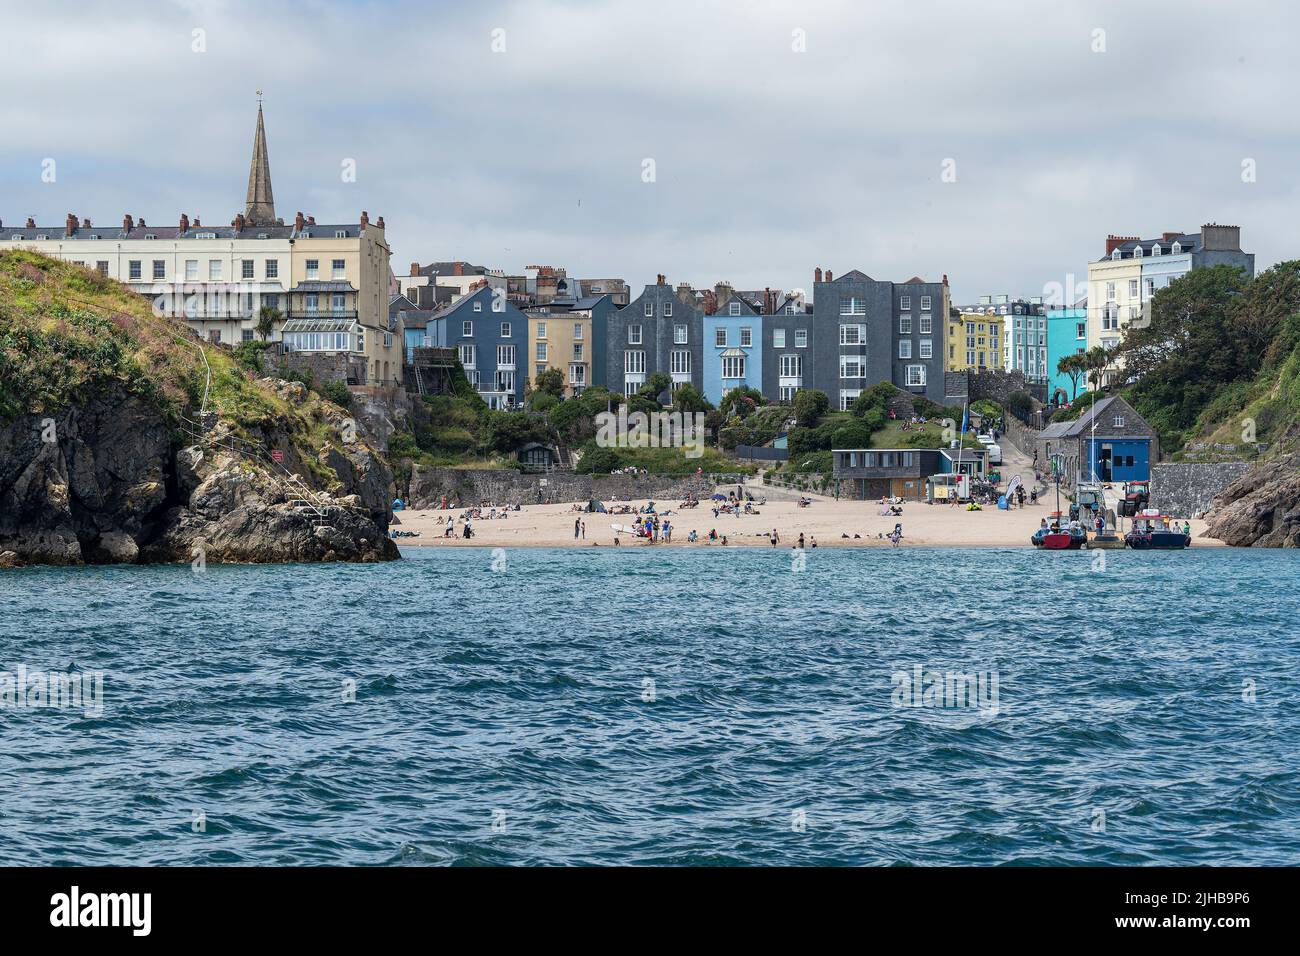 View of the beach and Tenby from the sea Stock Photo